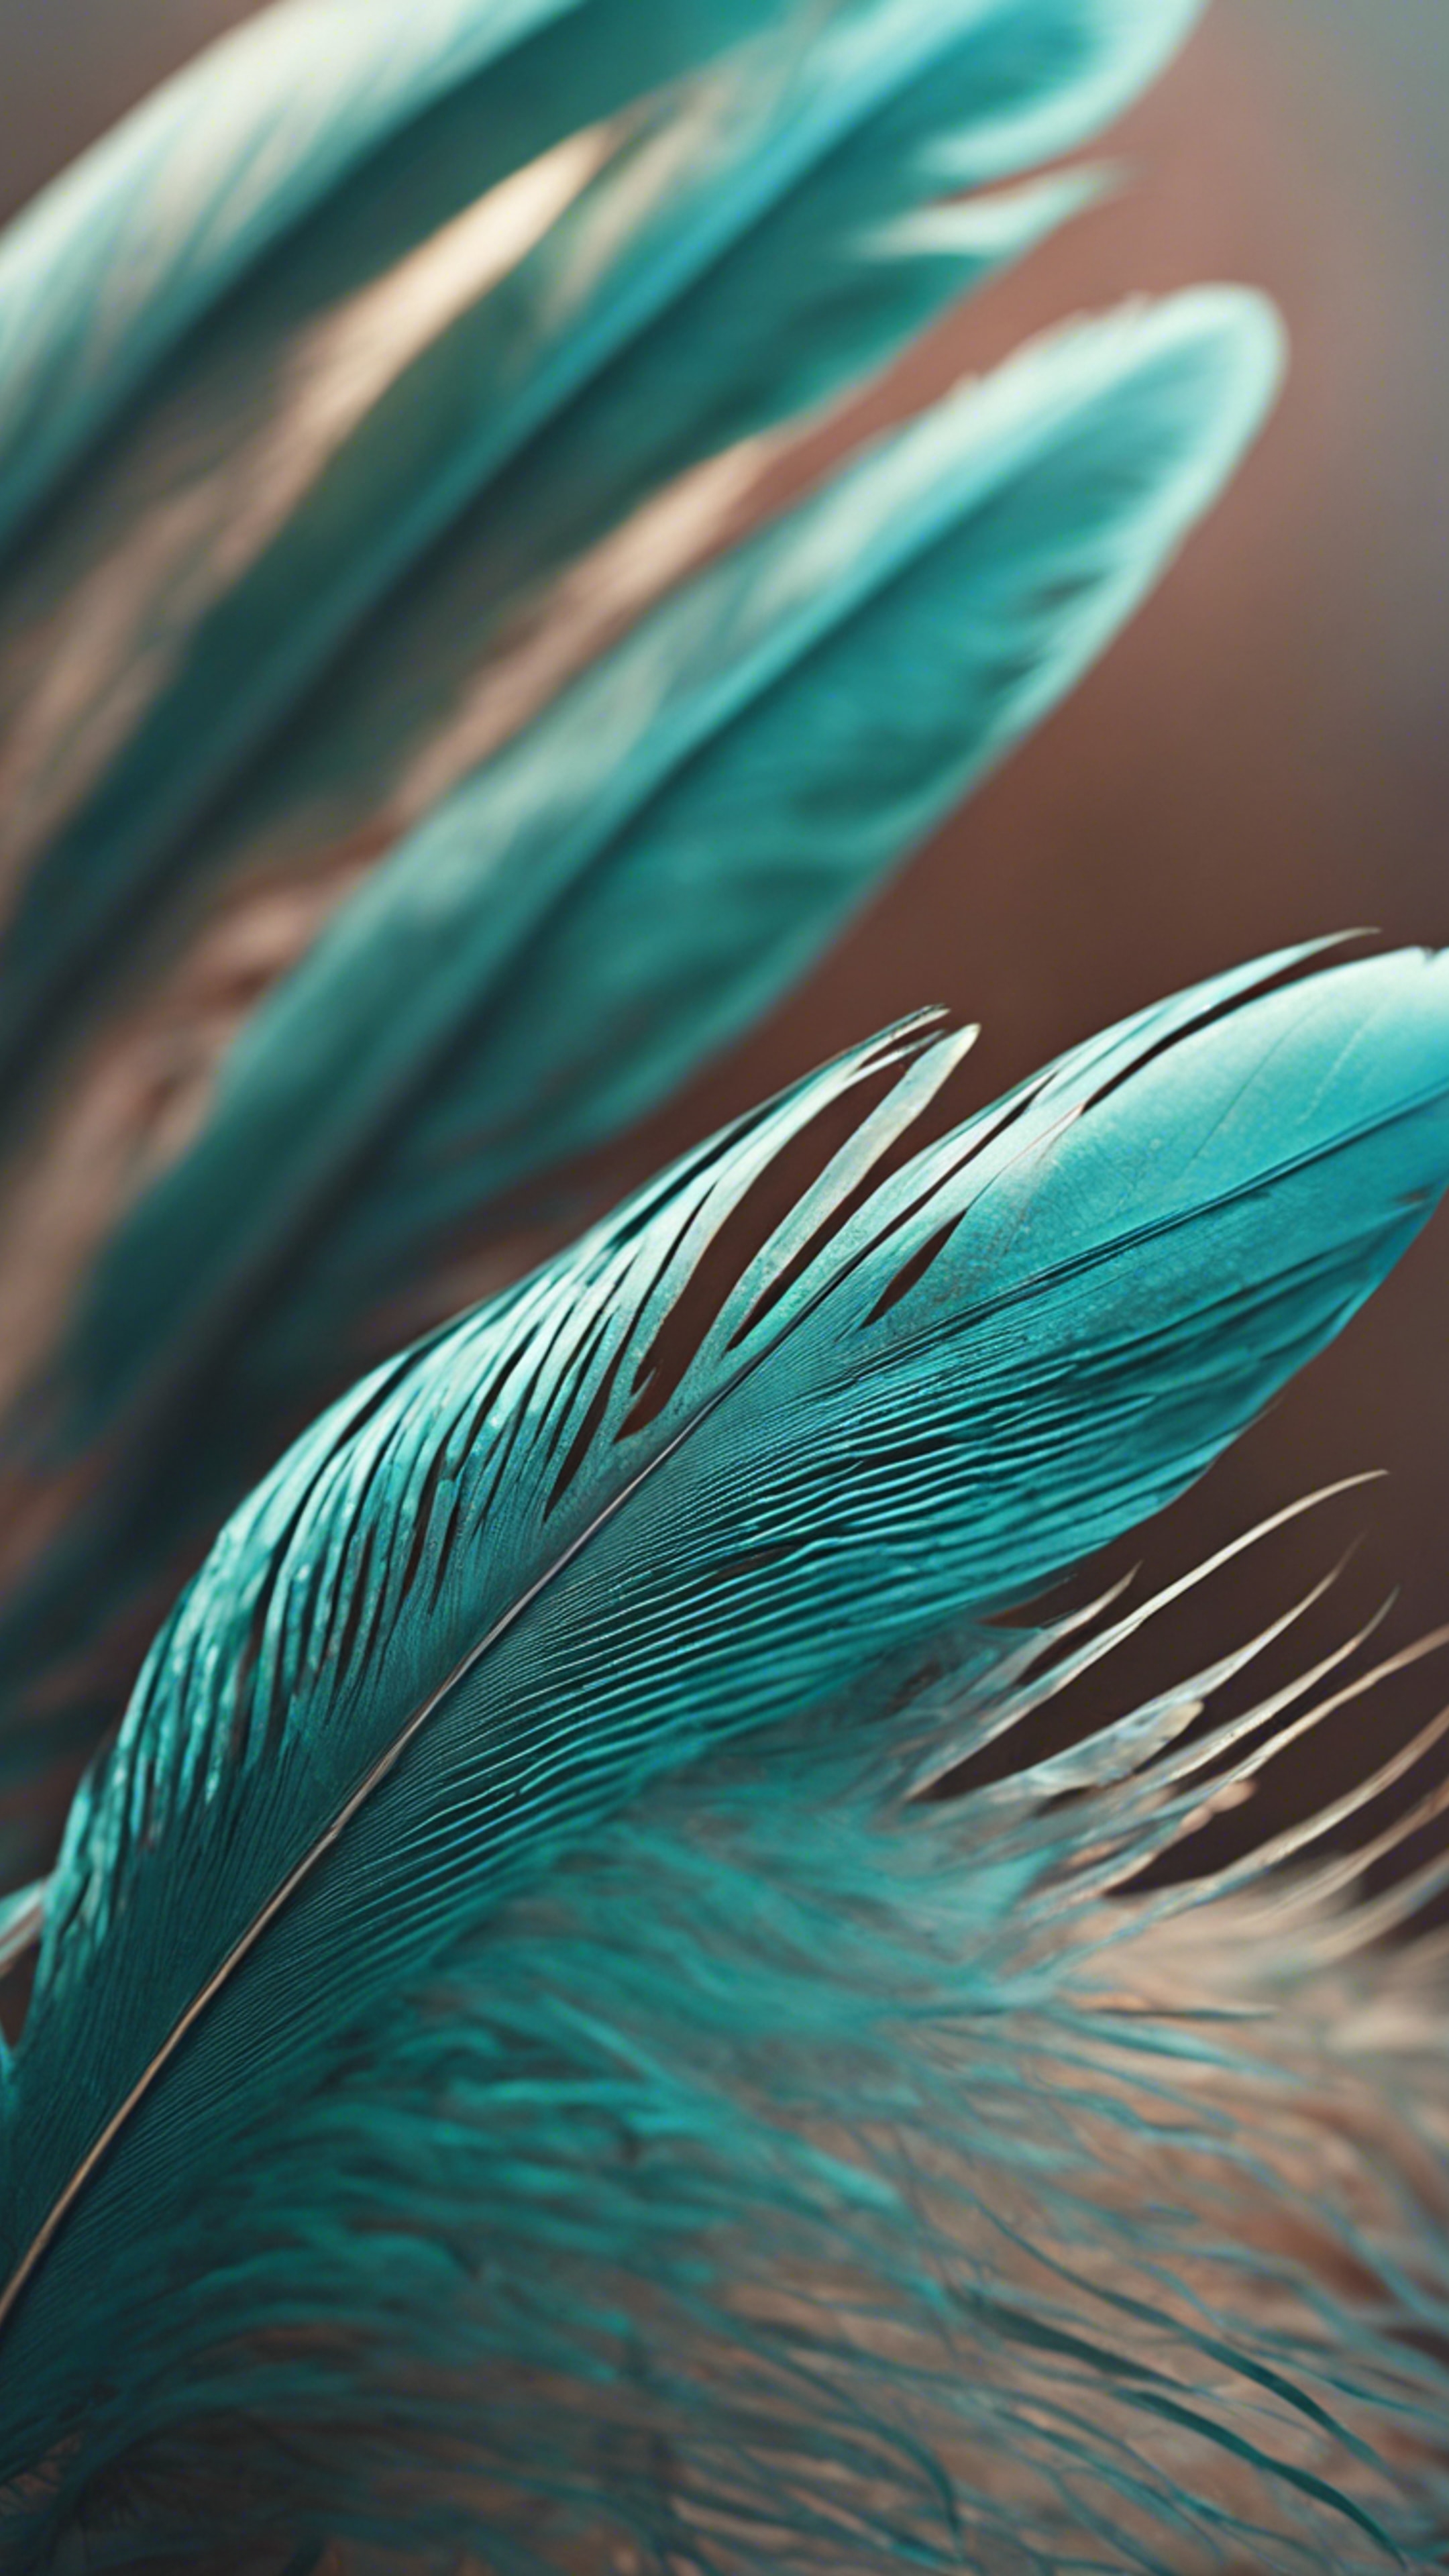 A close-up view of an exotic cool teal-colored birds' feather. Wallpaper[44d0beeee9f542d4ae1e]